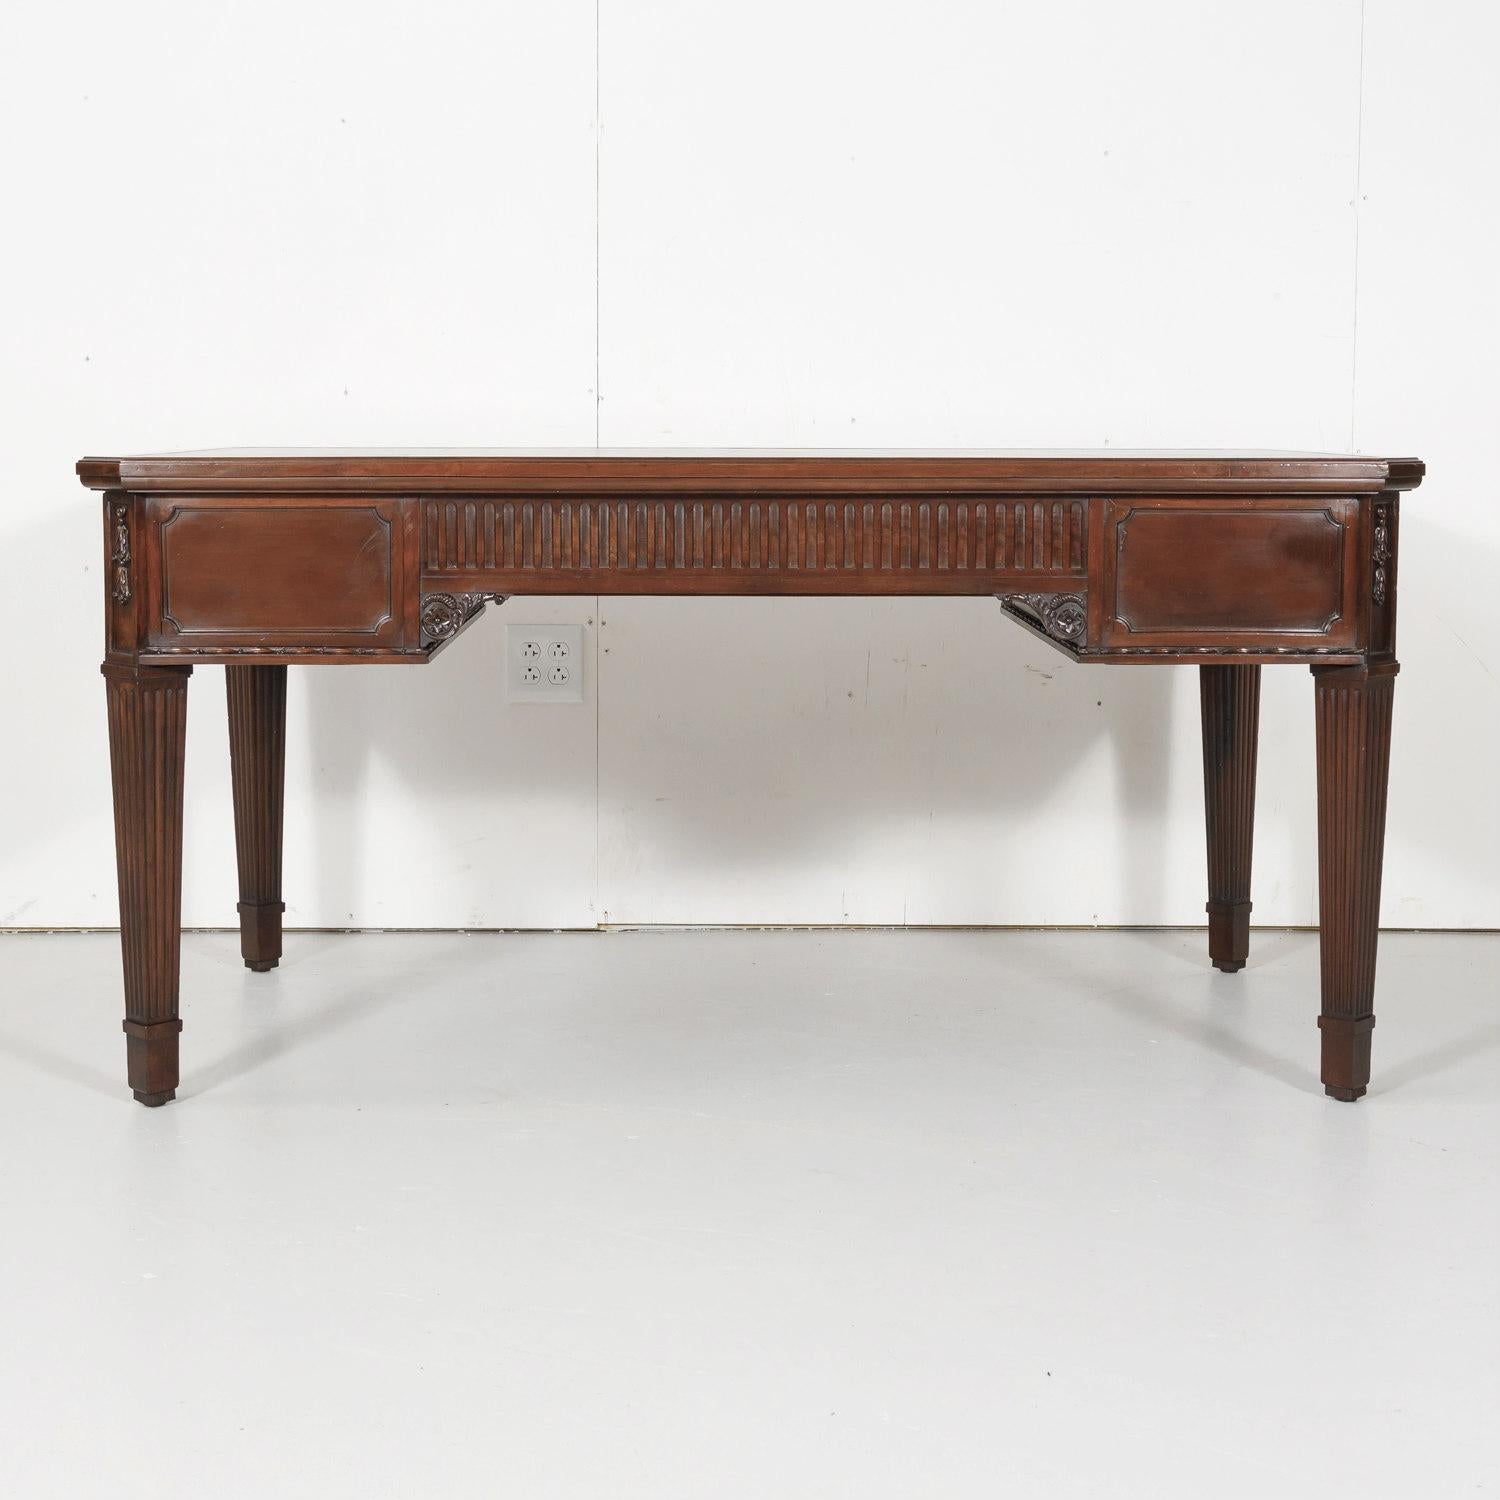 19th Century French Louis XVI Style Walnut Bureau Plat or Desk with Leather Top 15